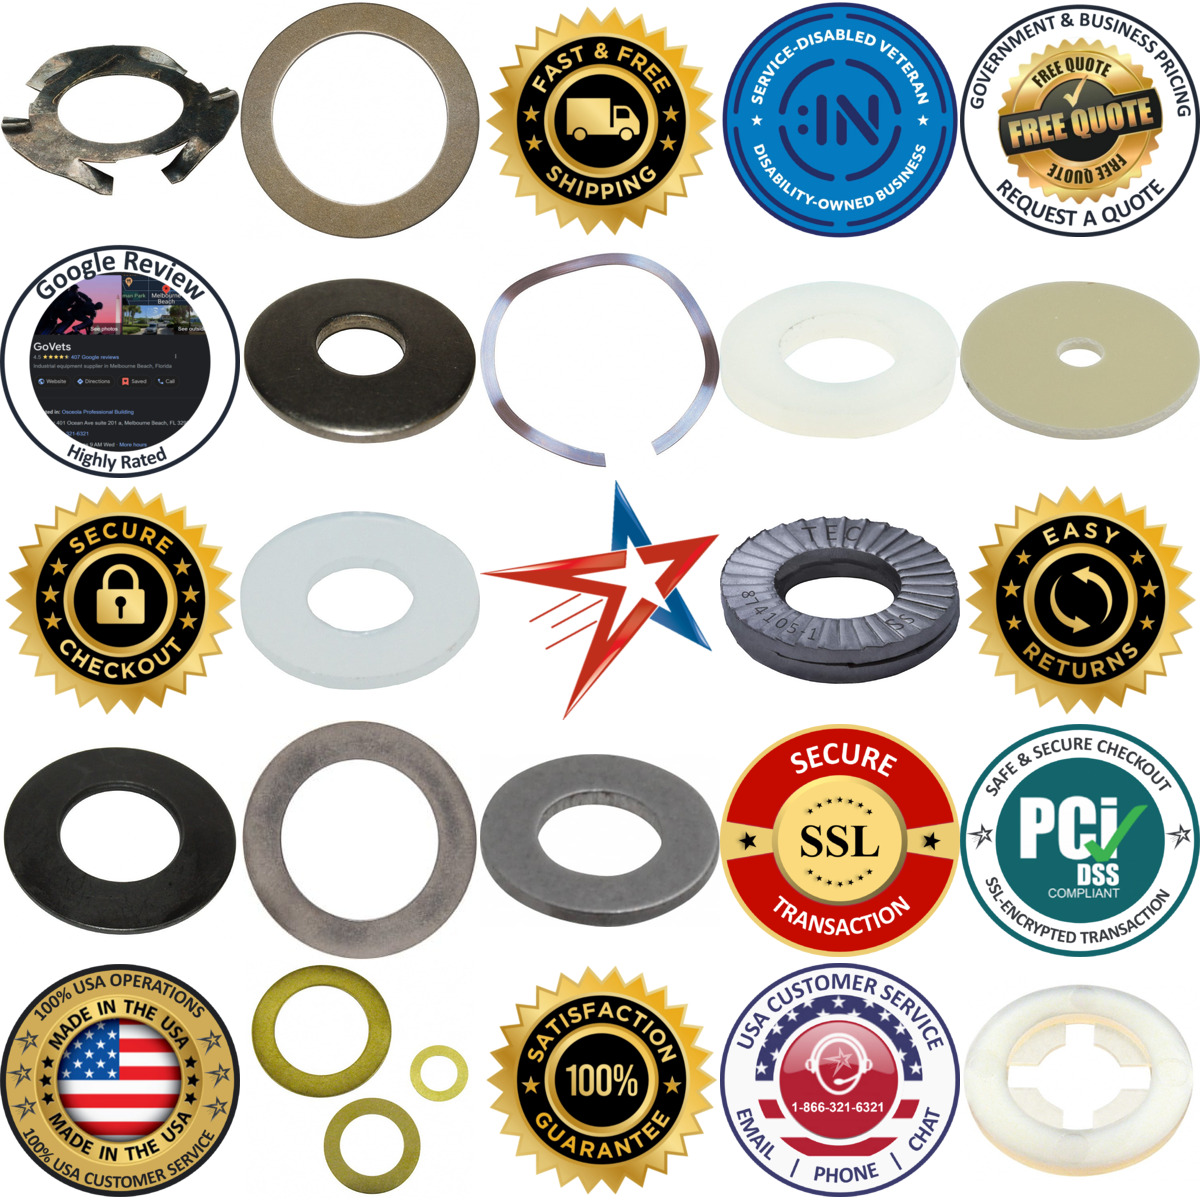 A selection of Washers and Shims products on GoVets